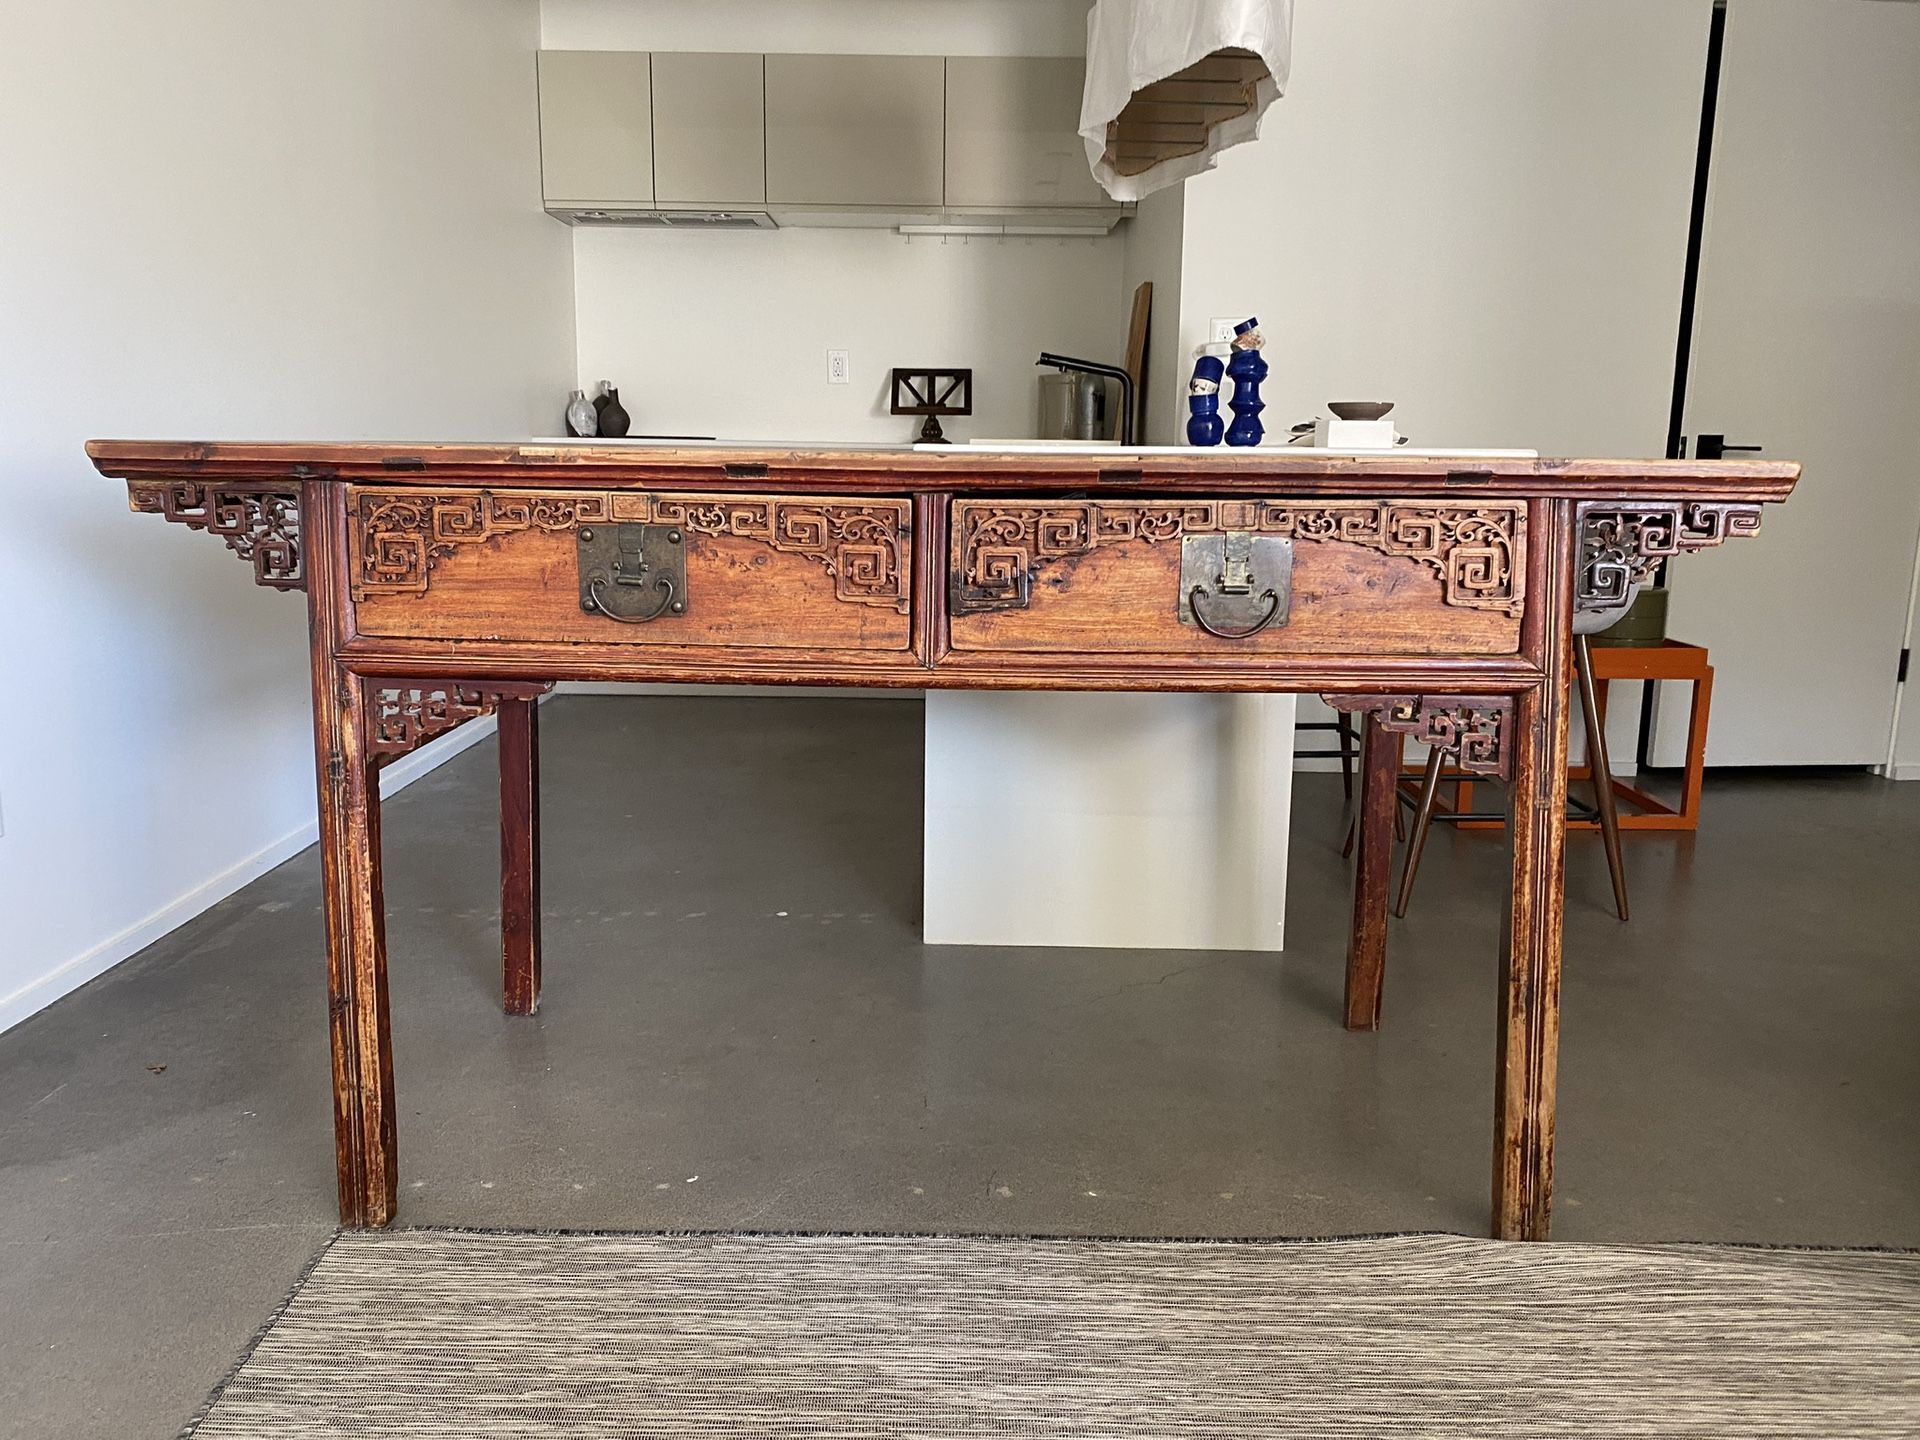 Authentic Chinese antique Caligraphy table.